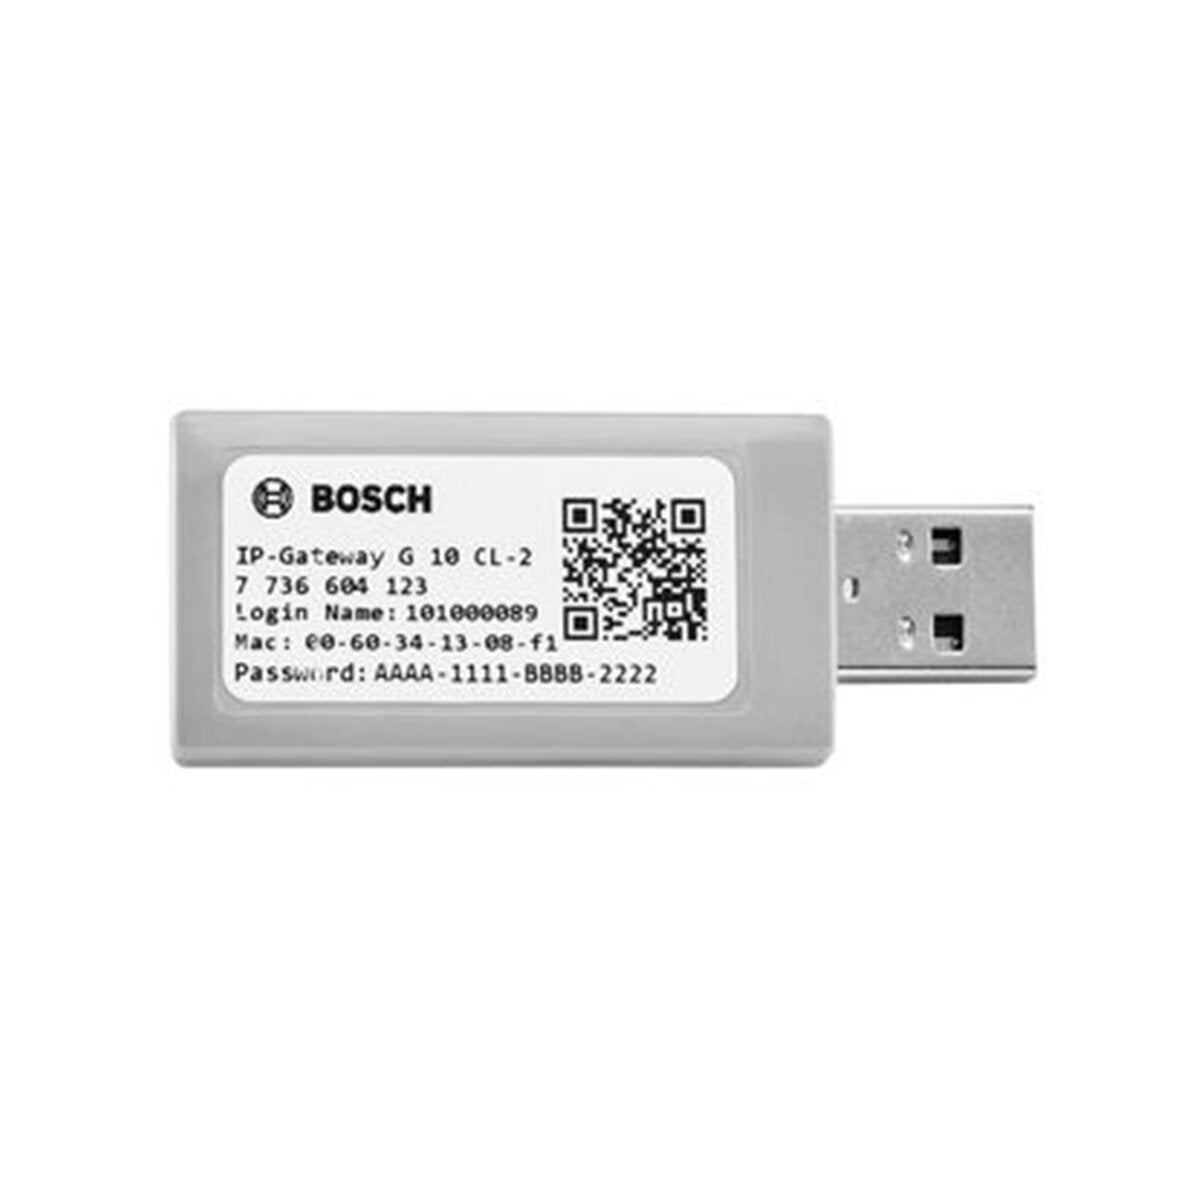 Bosch G 10 CL-1 WiFi module for Bosch Climate 3000i air conditioners